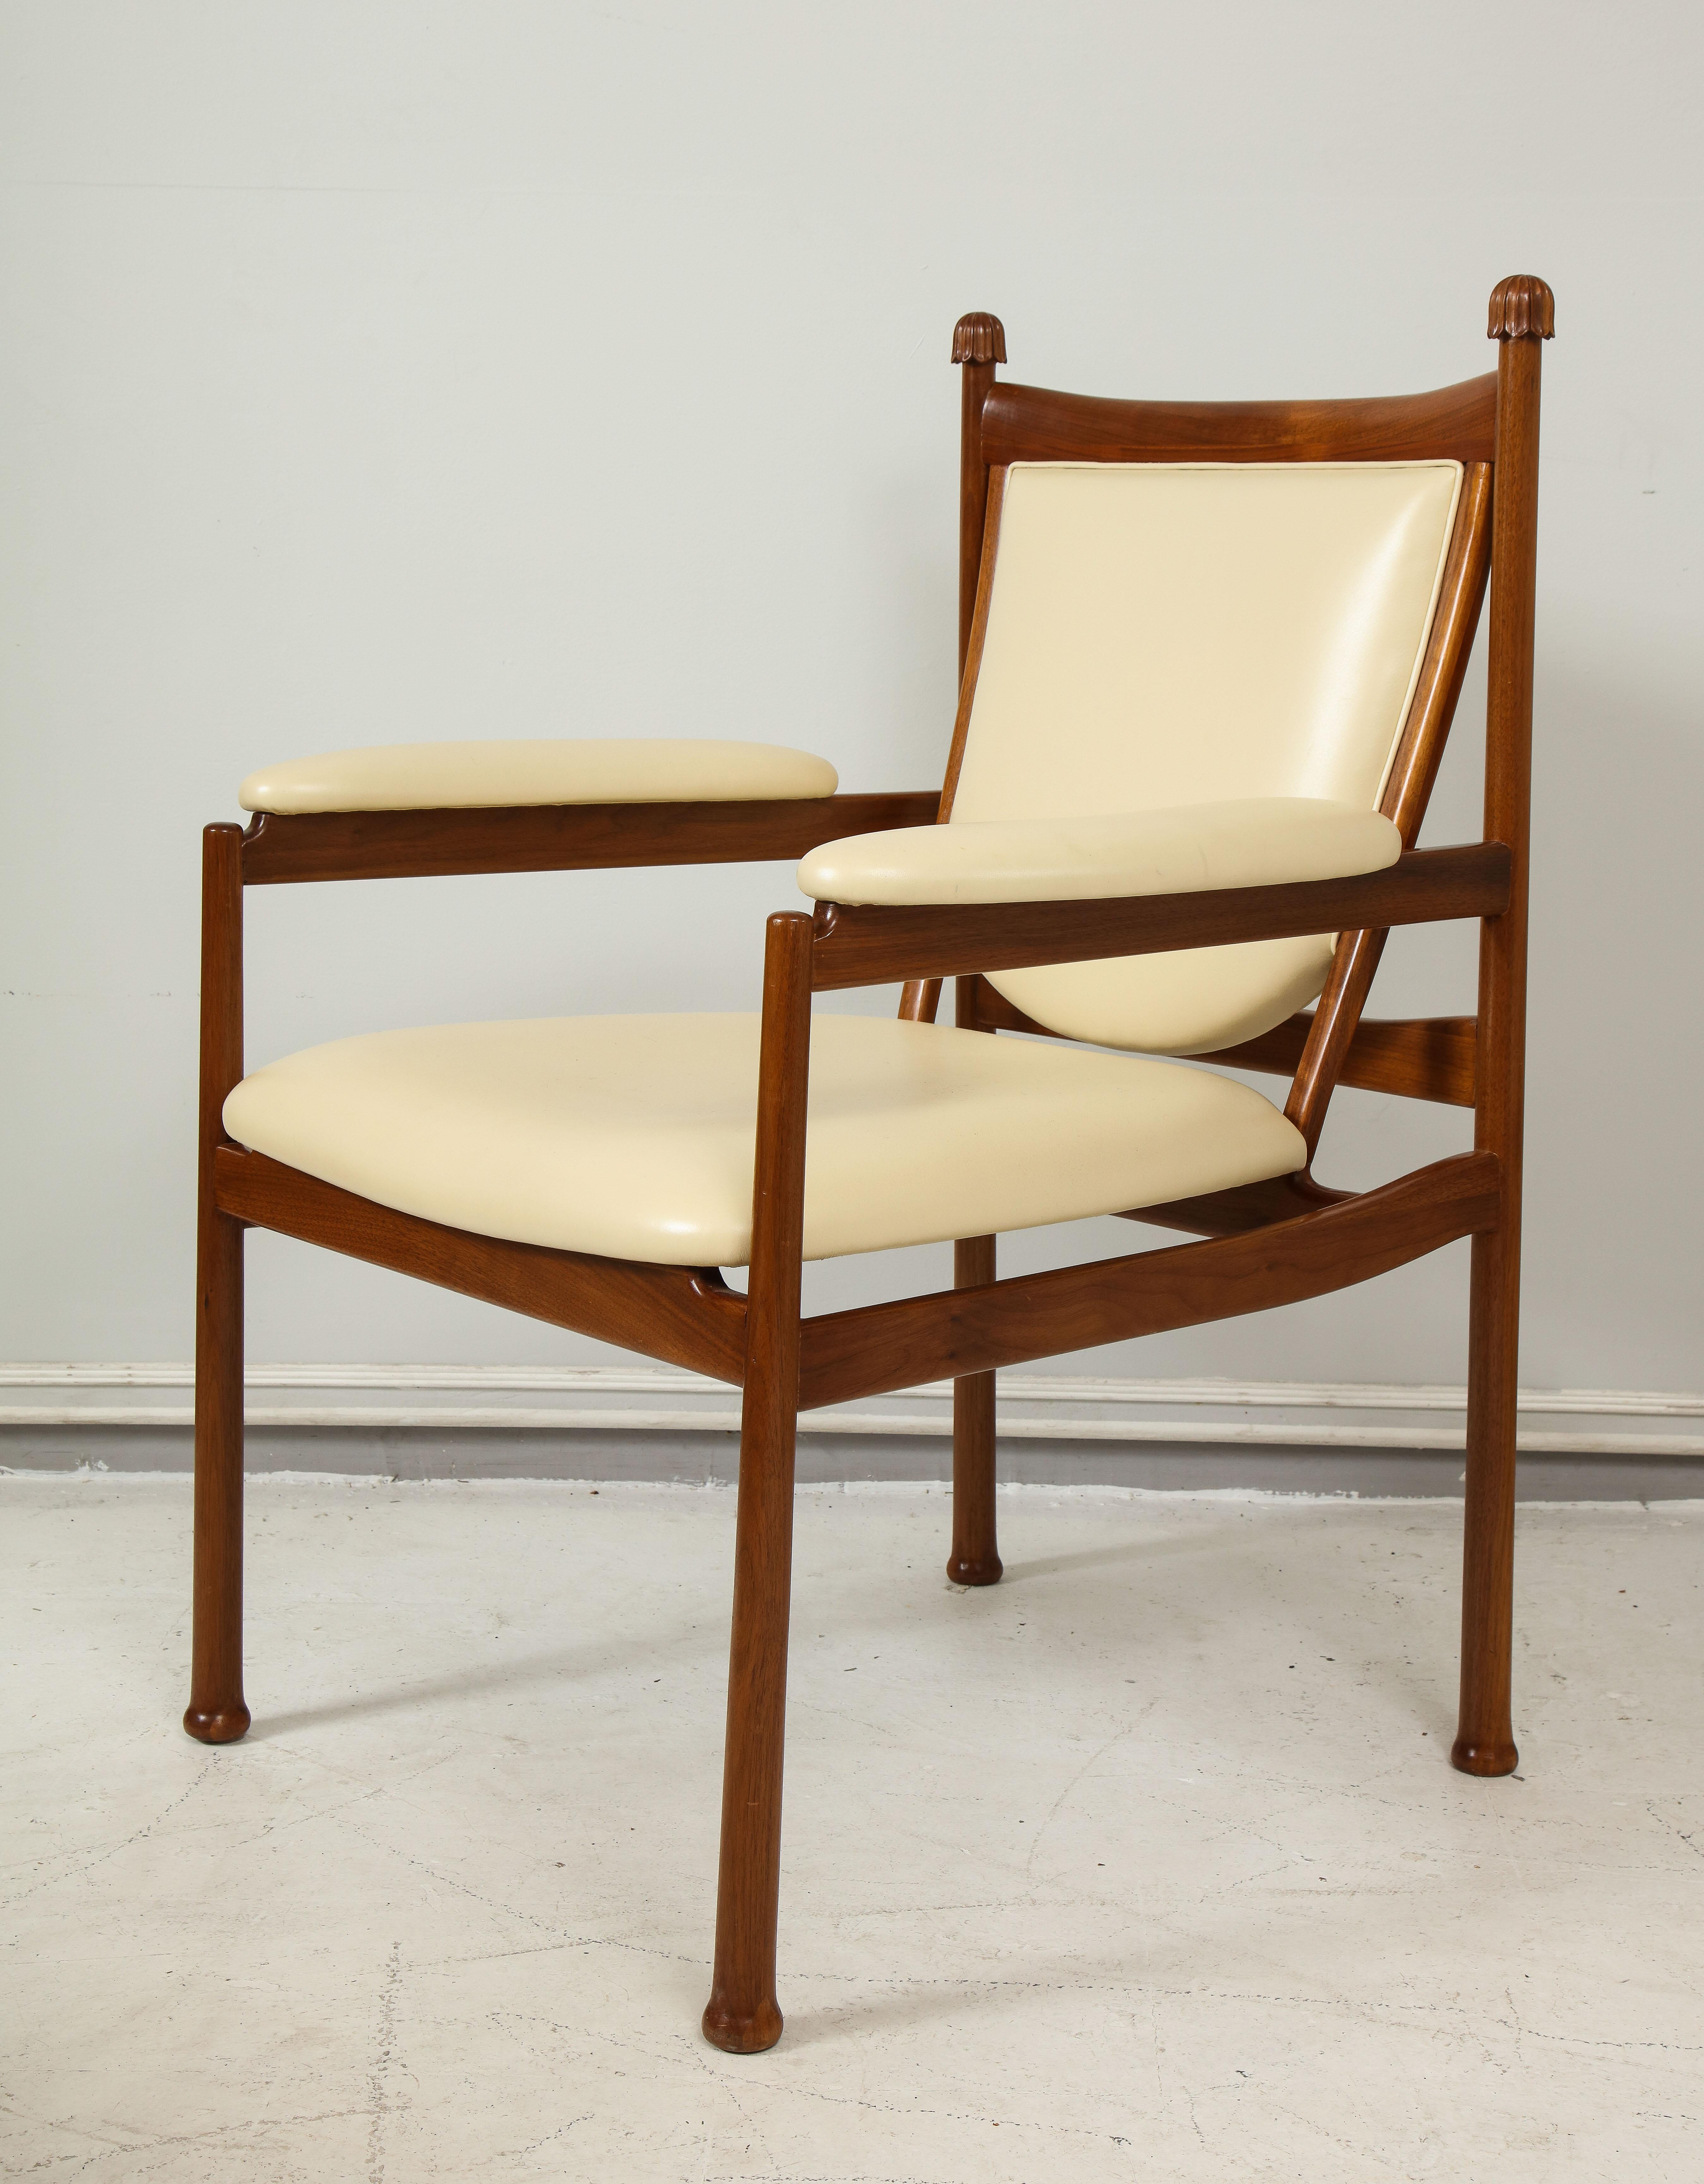 Custom walnut Marion armchair or lounge chair upholstered in cream leather.
Please note that this chair is customizable. Also note that for new orders - the price does not include upholstery - upholstery with COM is additional. Lead time is 8 to 10